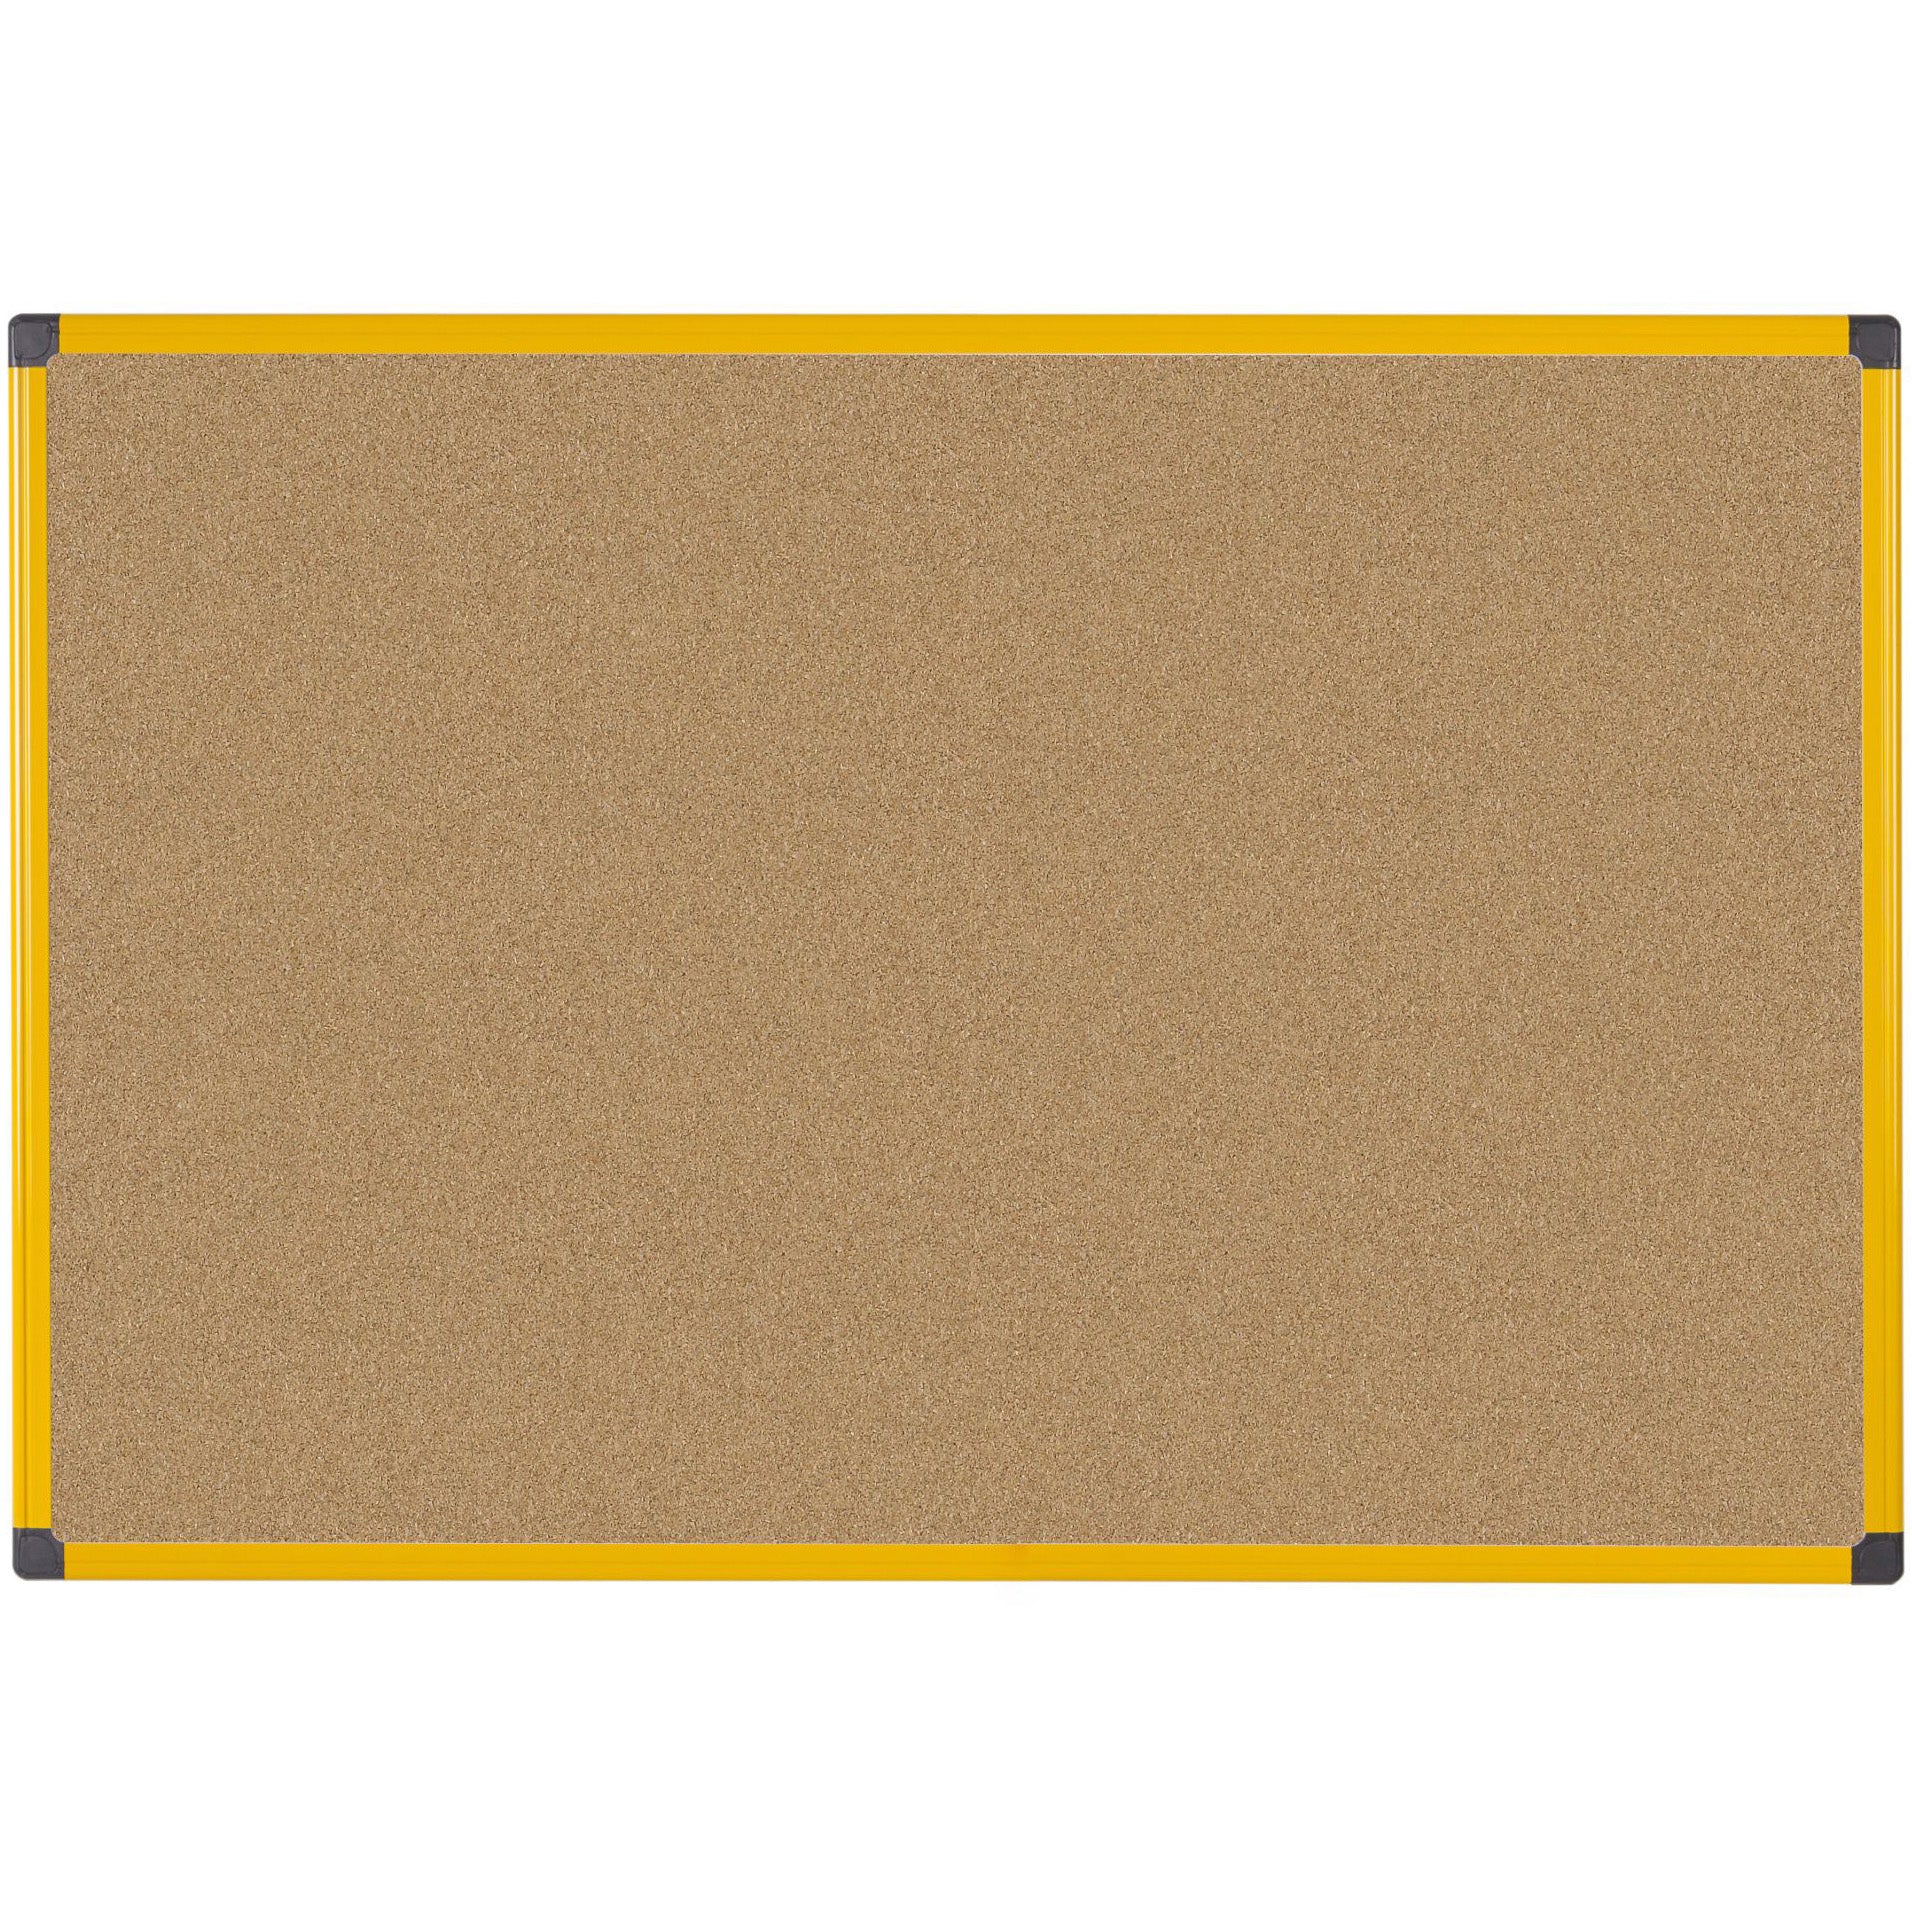 CA2711721 Industrial Series Ultrabrite Cork Bulletin Board, Wall Mounting Push Pin Cork Board , 48" x 72", Yellow Frame by MasterVision